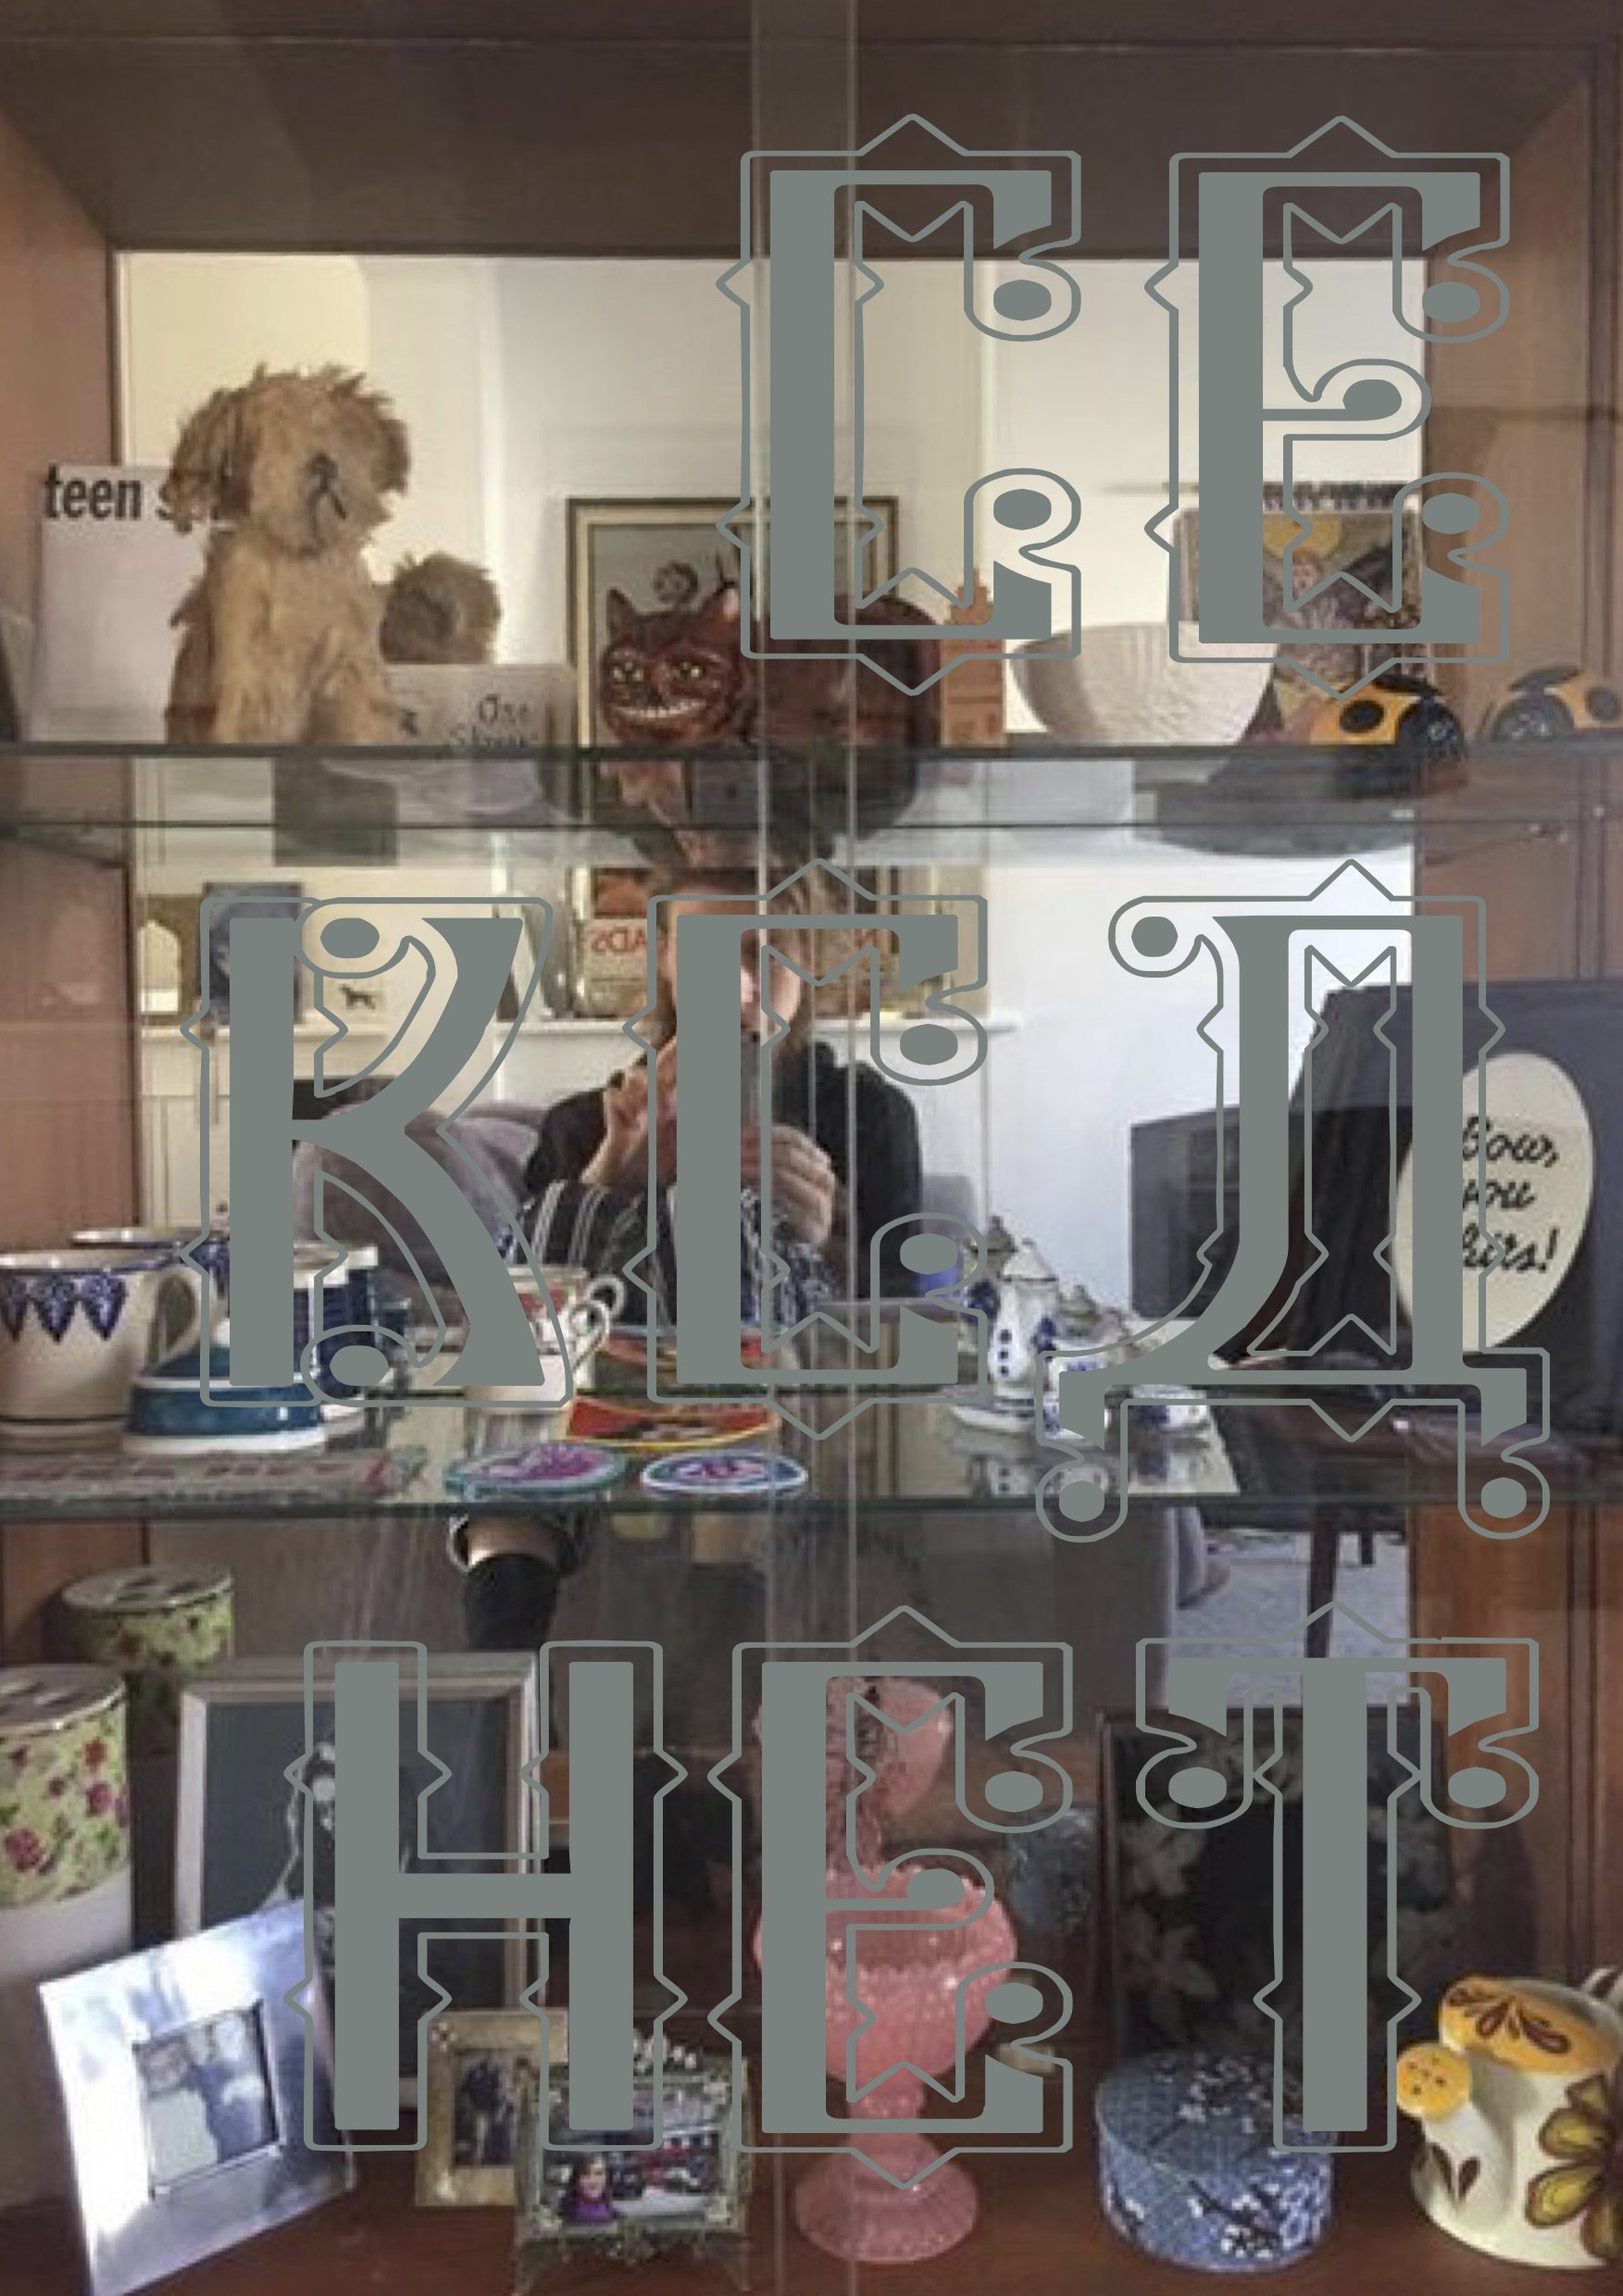 cekca het promo. An image of merchandise behind glass and reflected in mirror at back of cabinet